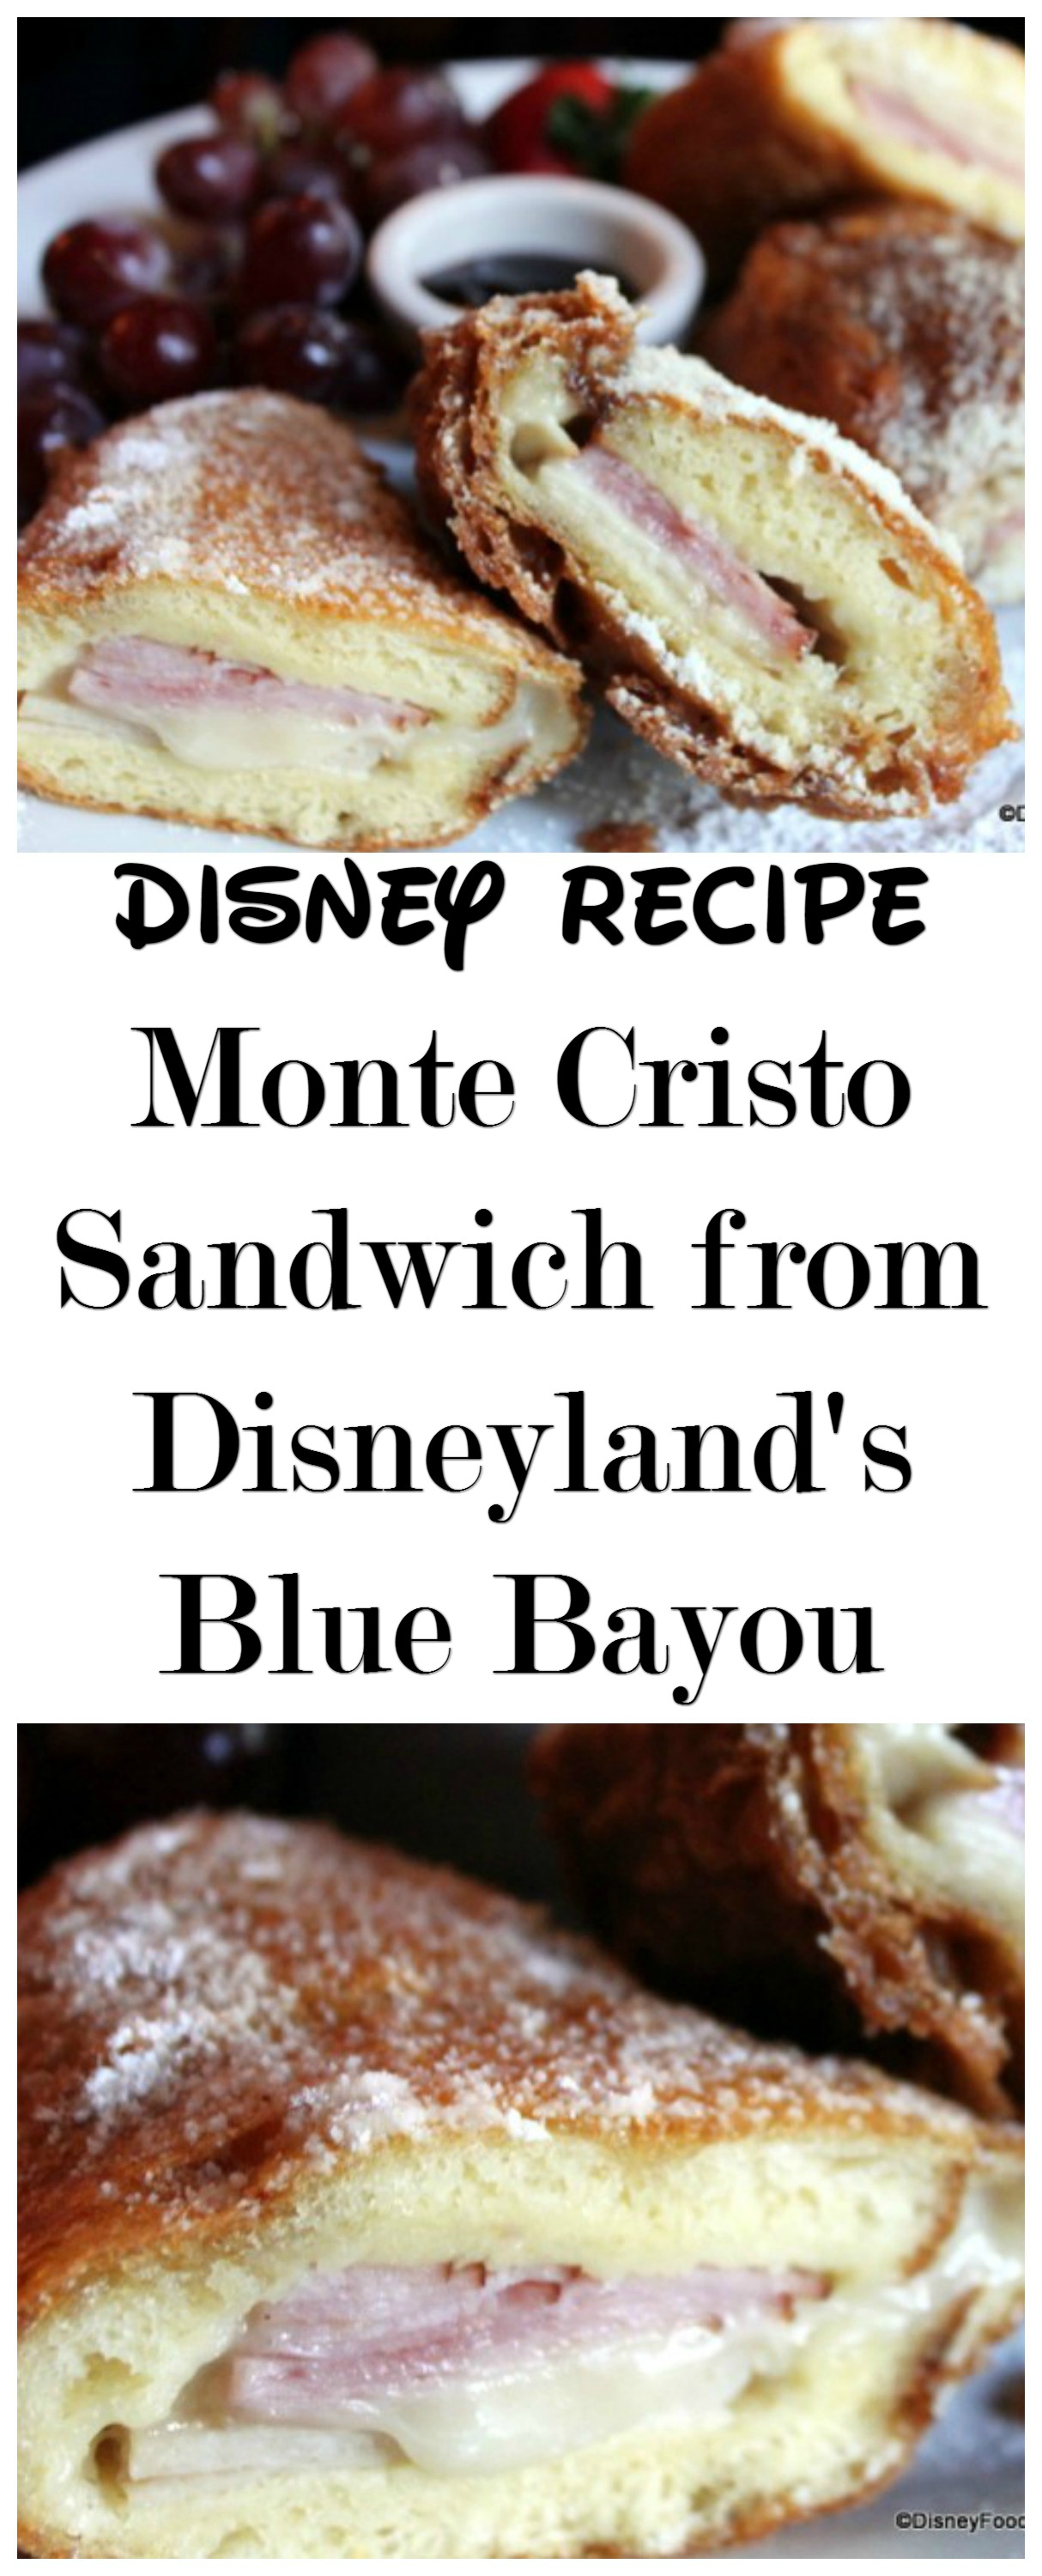 Get the Disney Recipe for the Monte Cristo Sandwich from Disneyland's Blue Bayou!